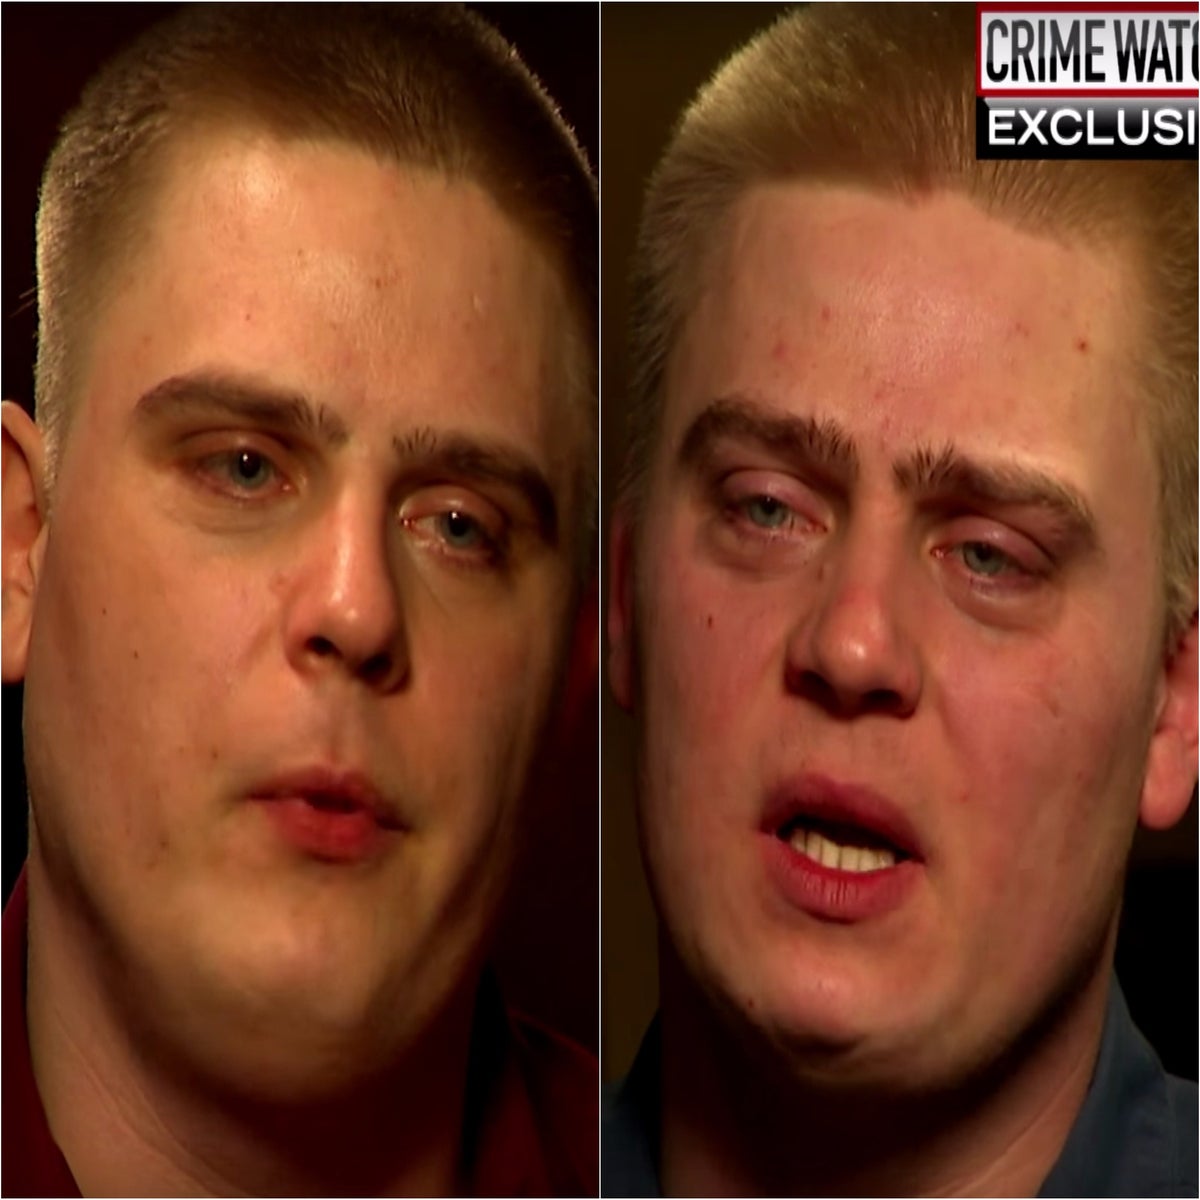 Crime Watch Daily exclusive: Steven Avery's twin sons tell their